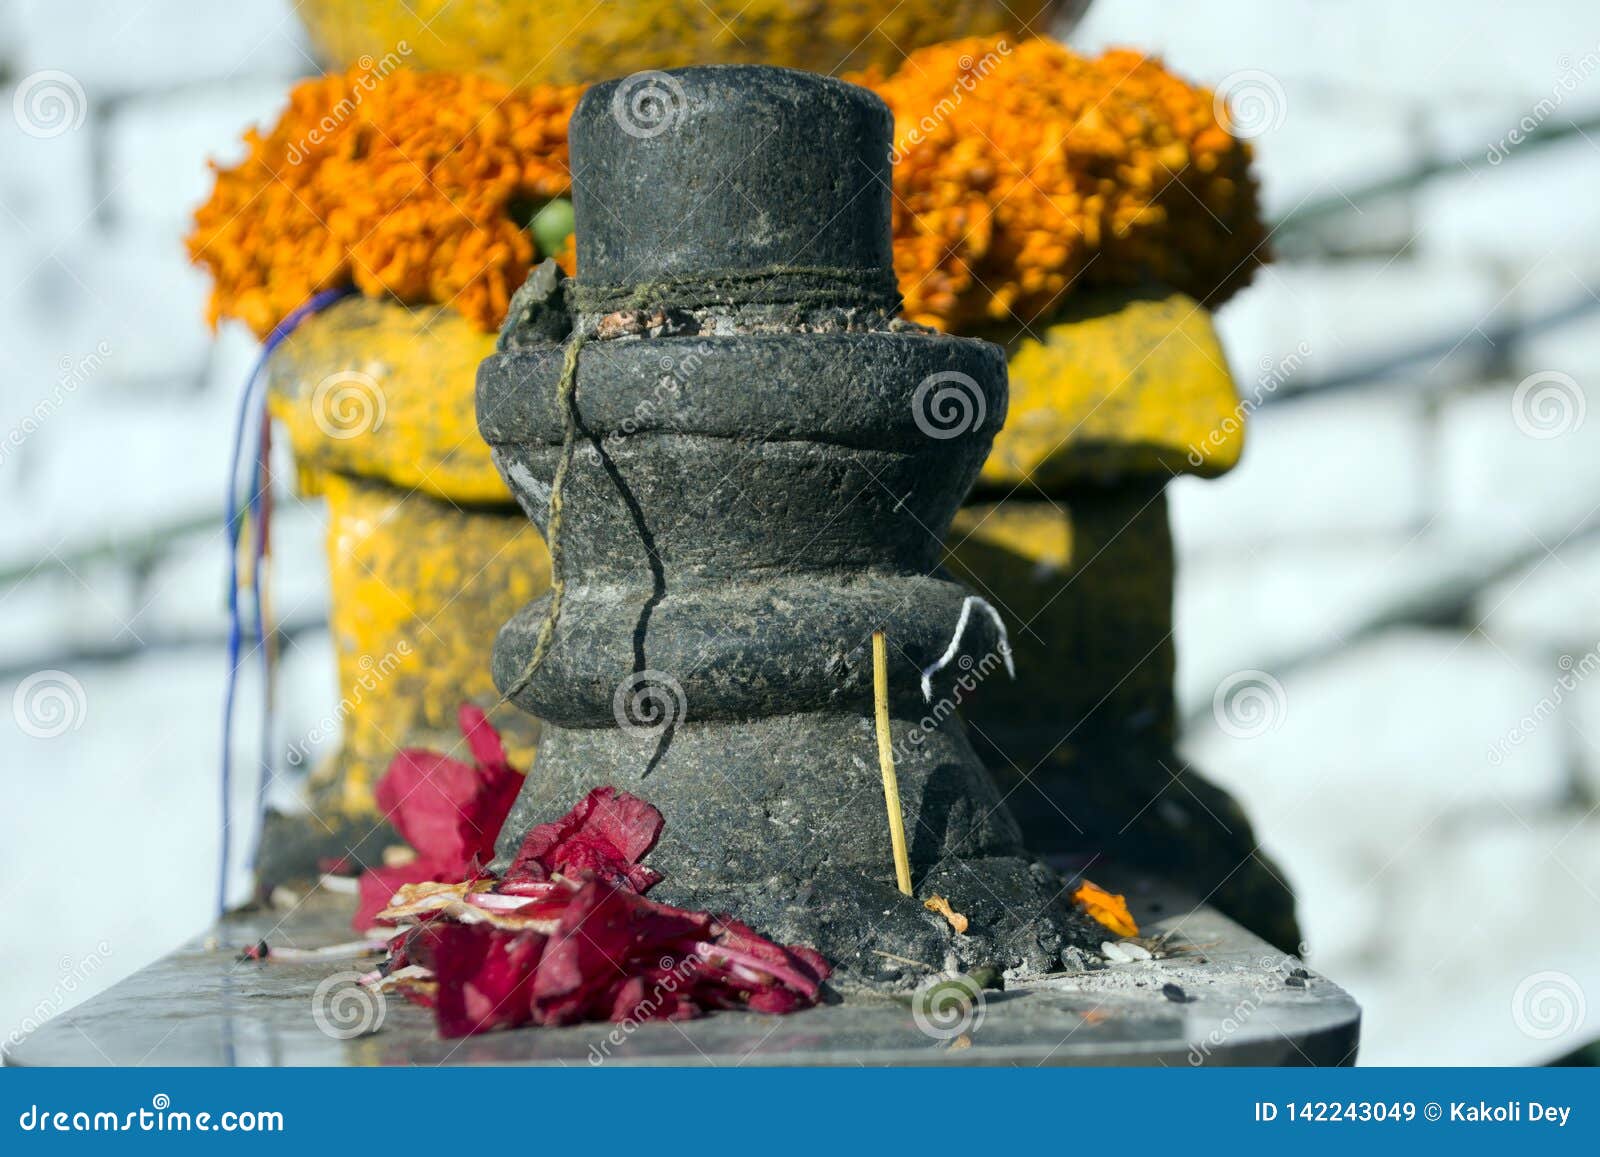 The Hindu God Siva is Worshipped in Lingam Form. Stock Image ...